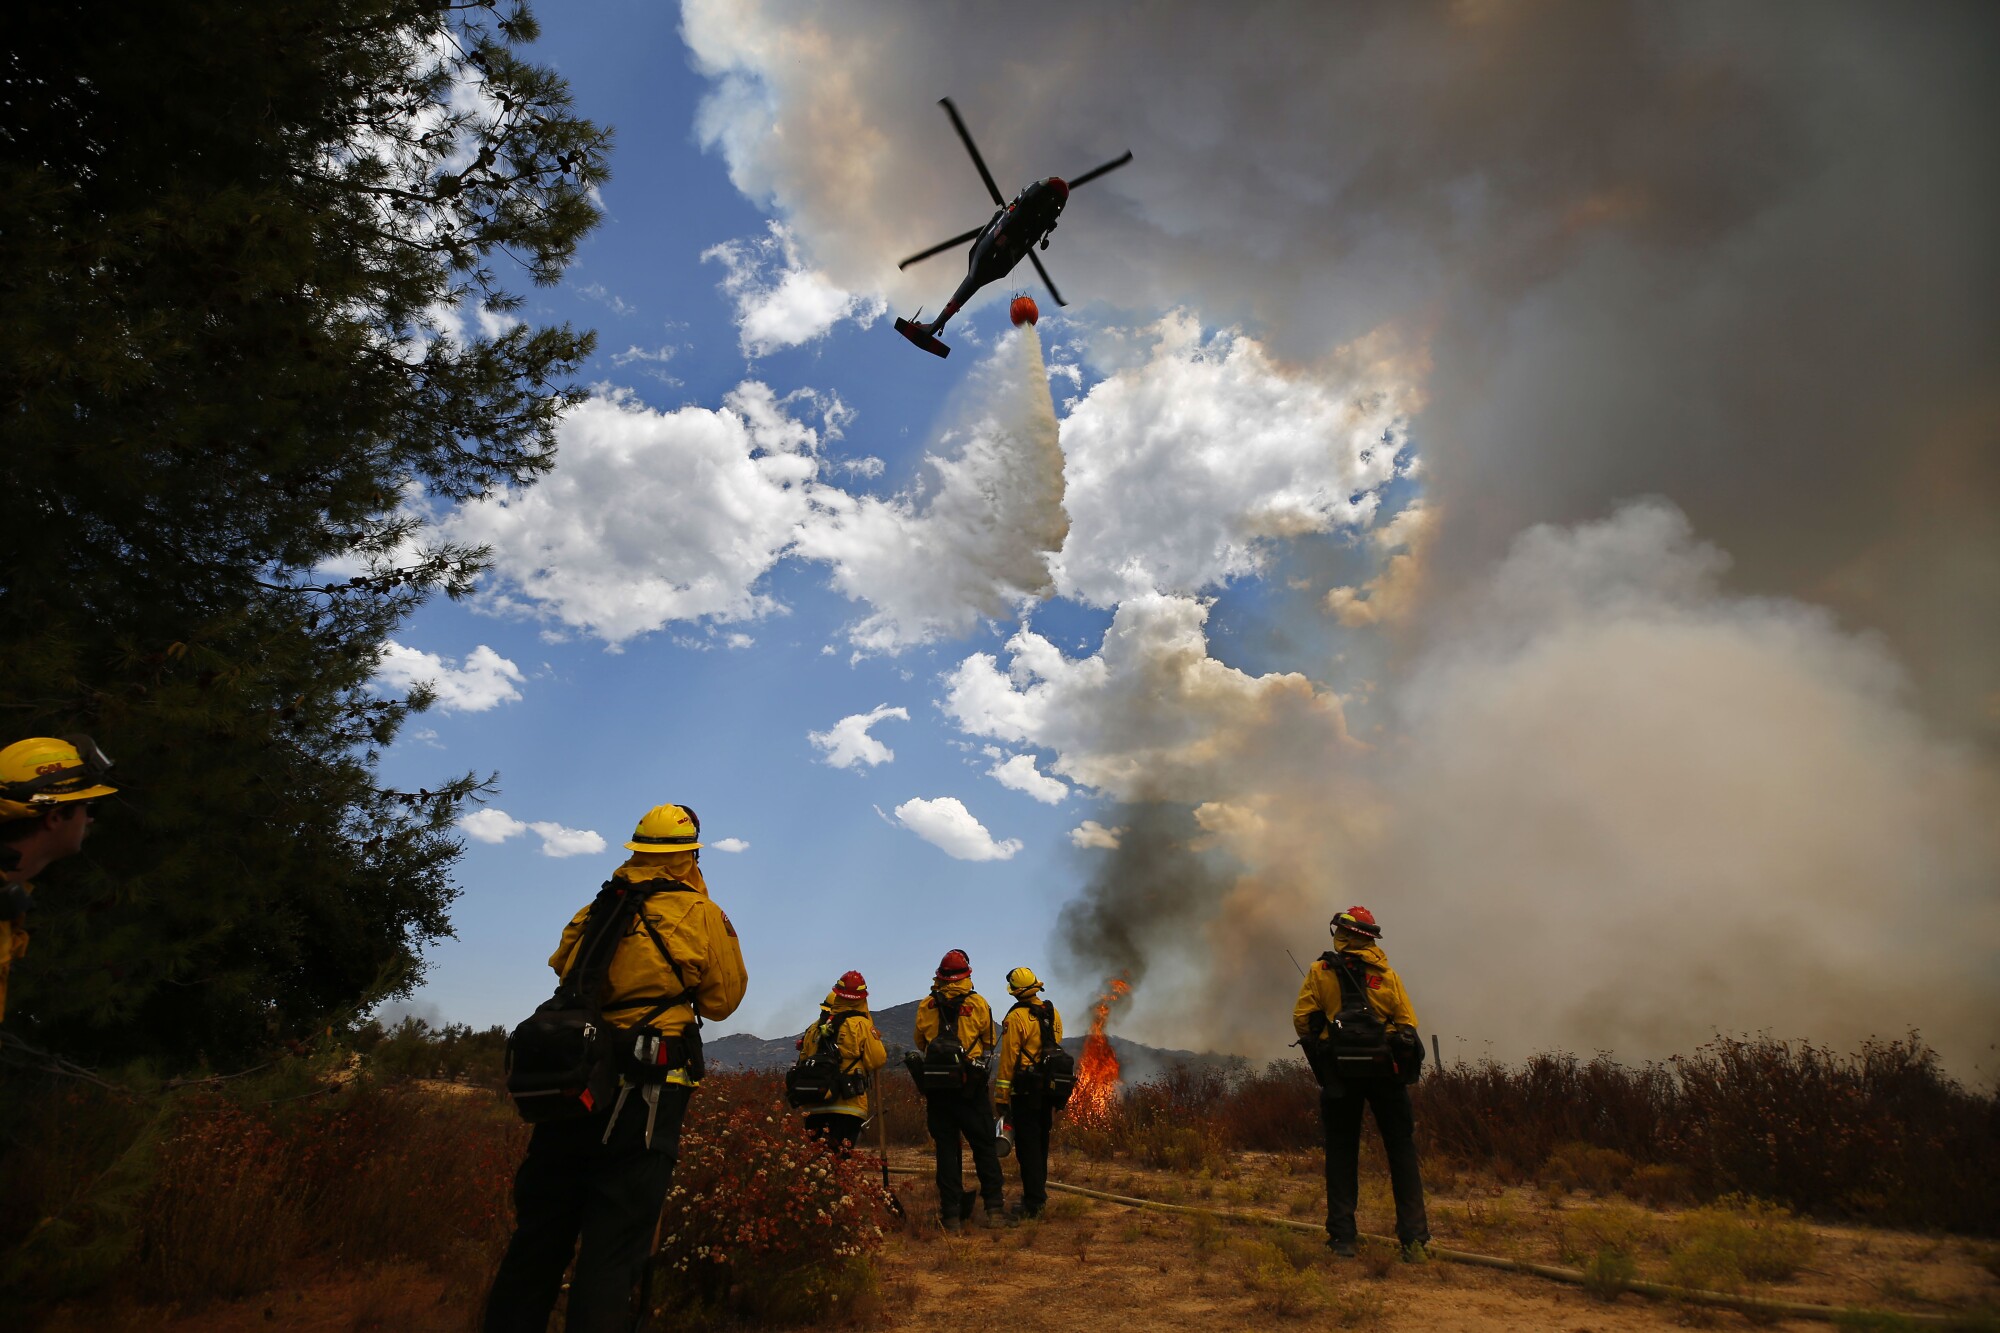 A helicopter makes a drop near on Montiel Truck Trail during the Valley fire on Sunday, Sept. 6, 2020